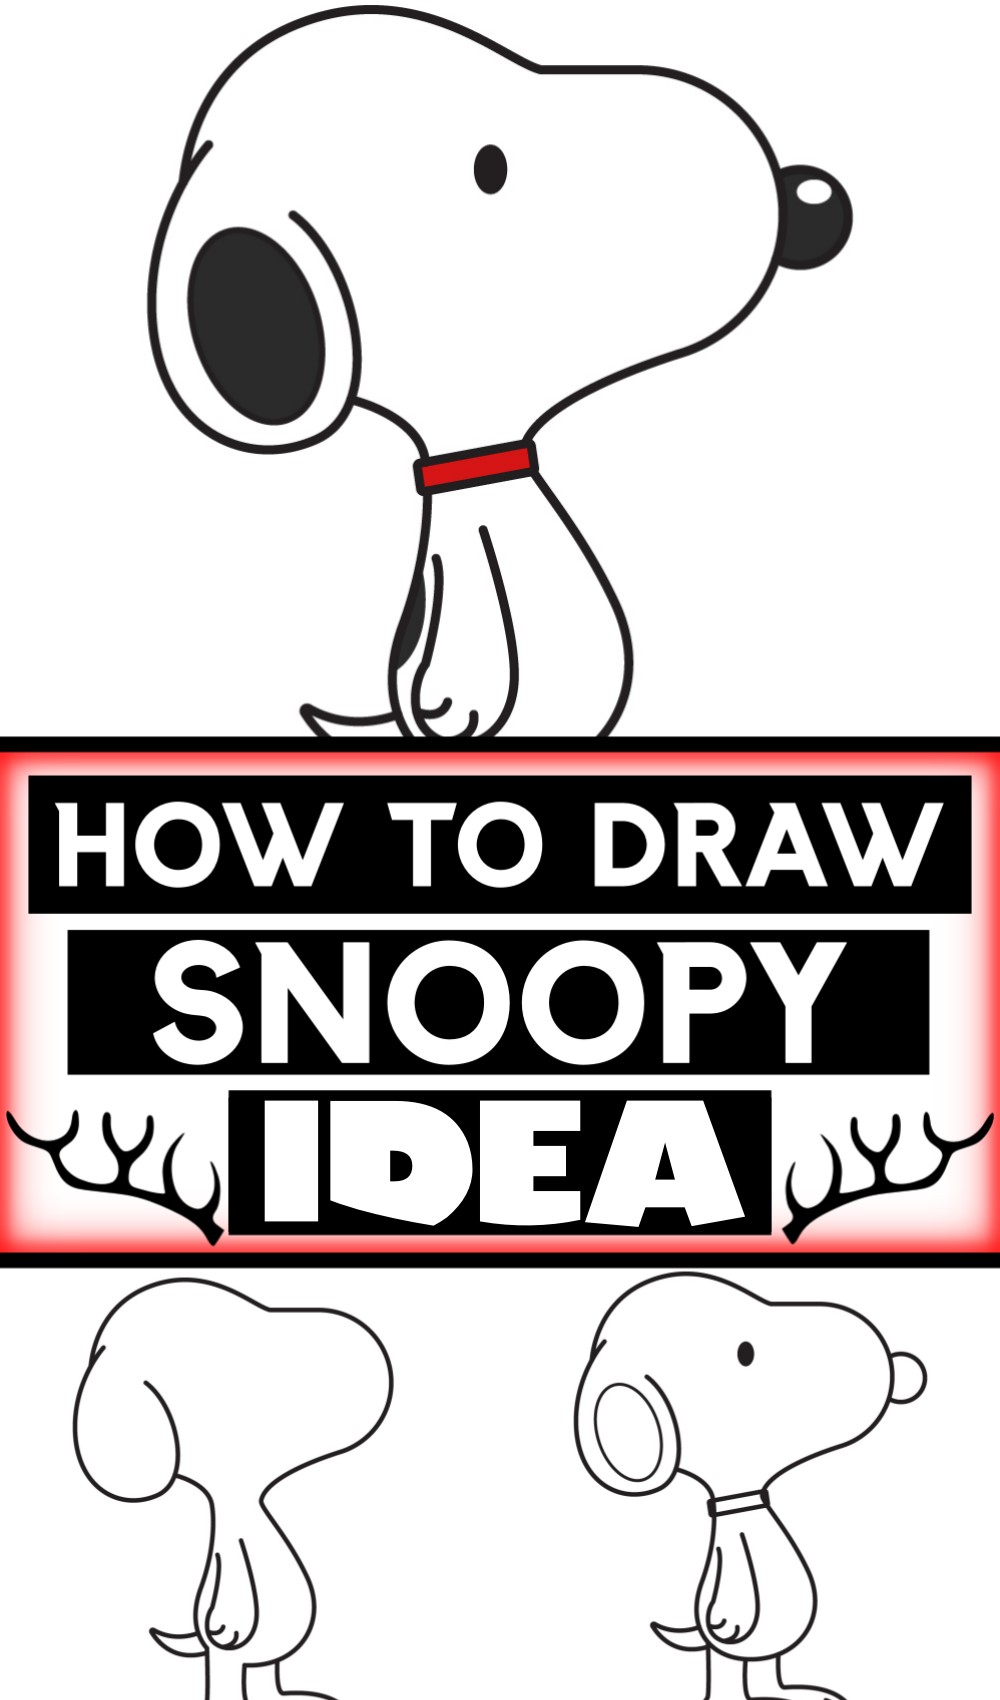 How To Draw Snoopy 1